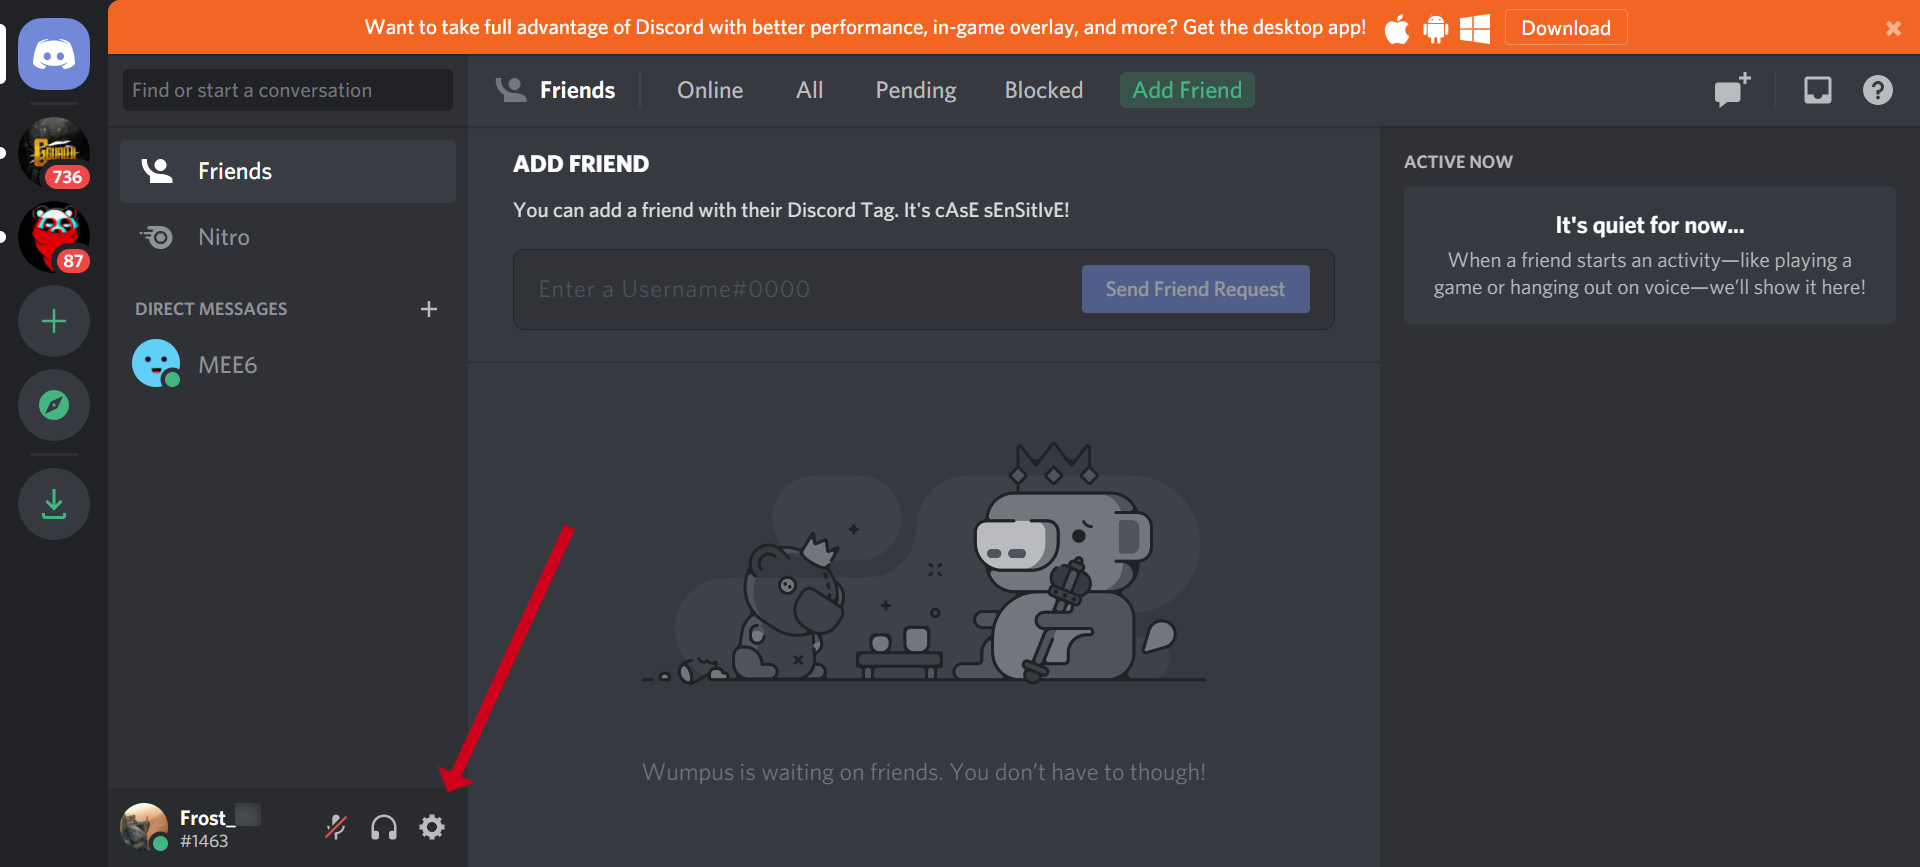 How to Enable Push to Talk Discord 